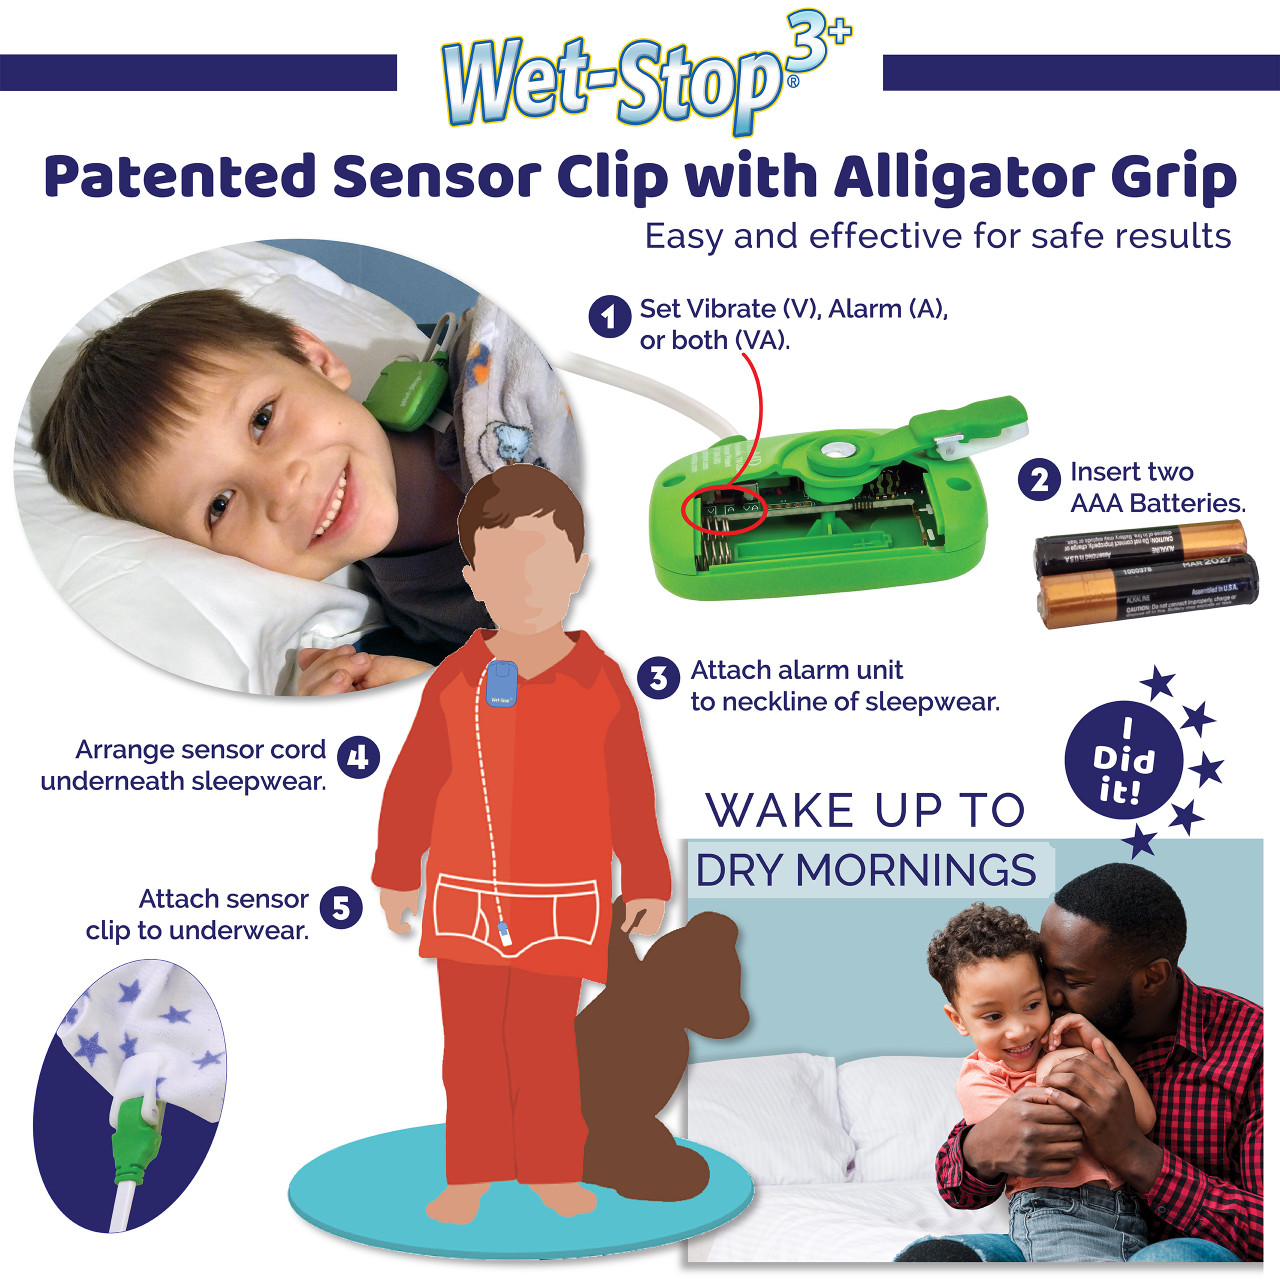 Wet-Stop3 Bedwetting Alarm - Green  Bedwetting & Potty Training Solutions